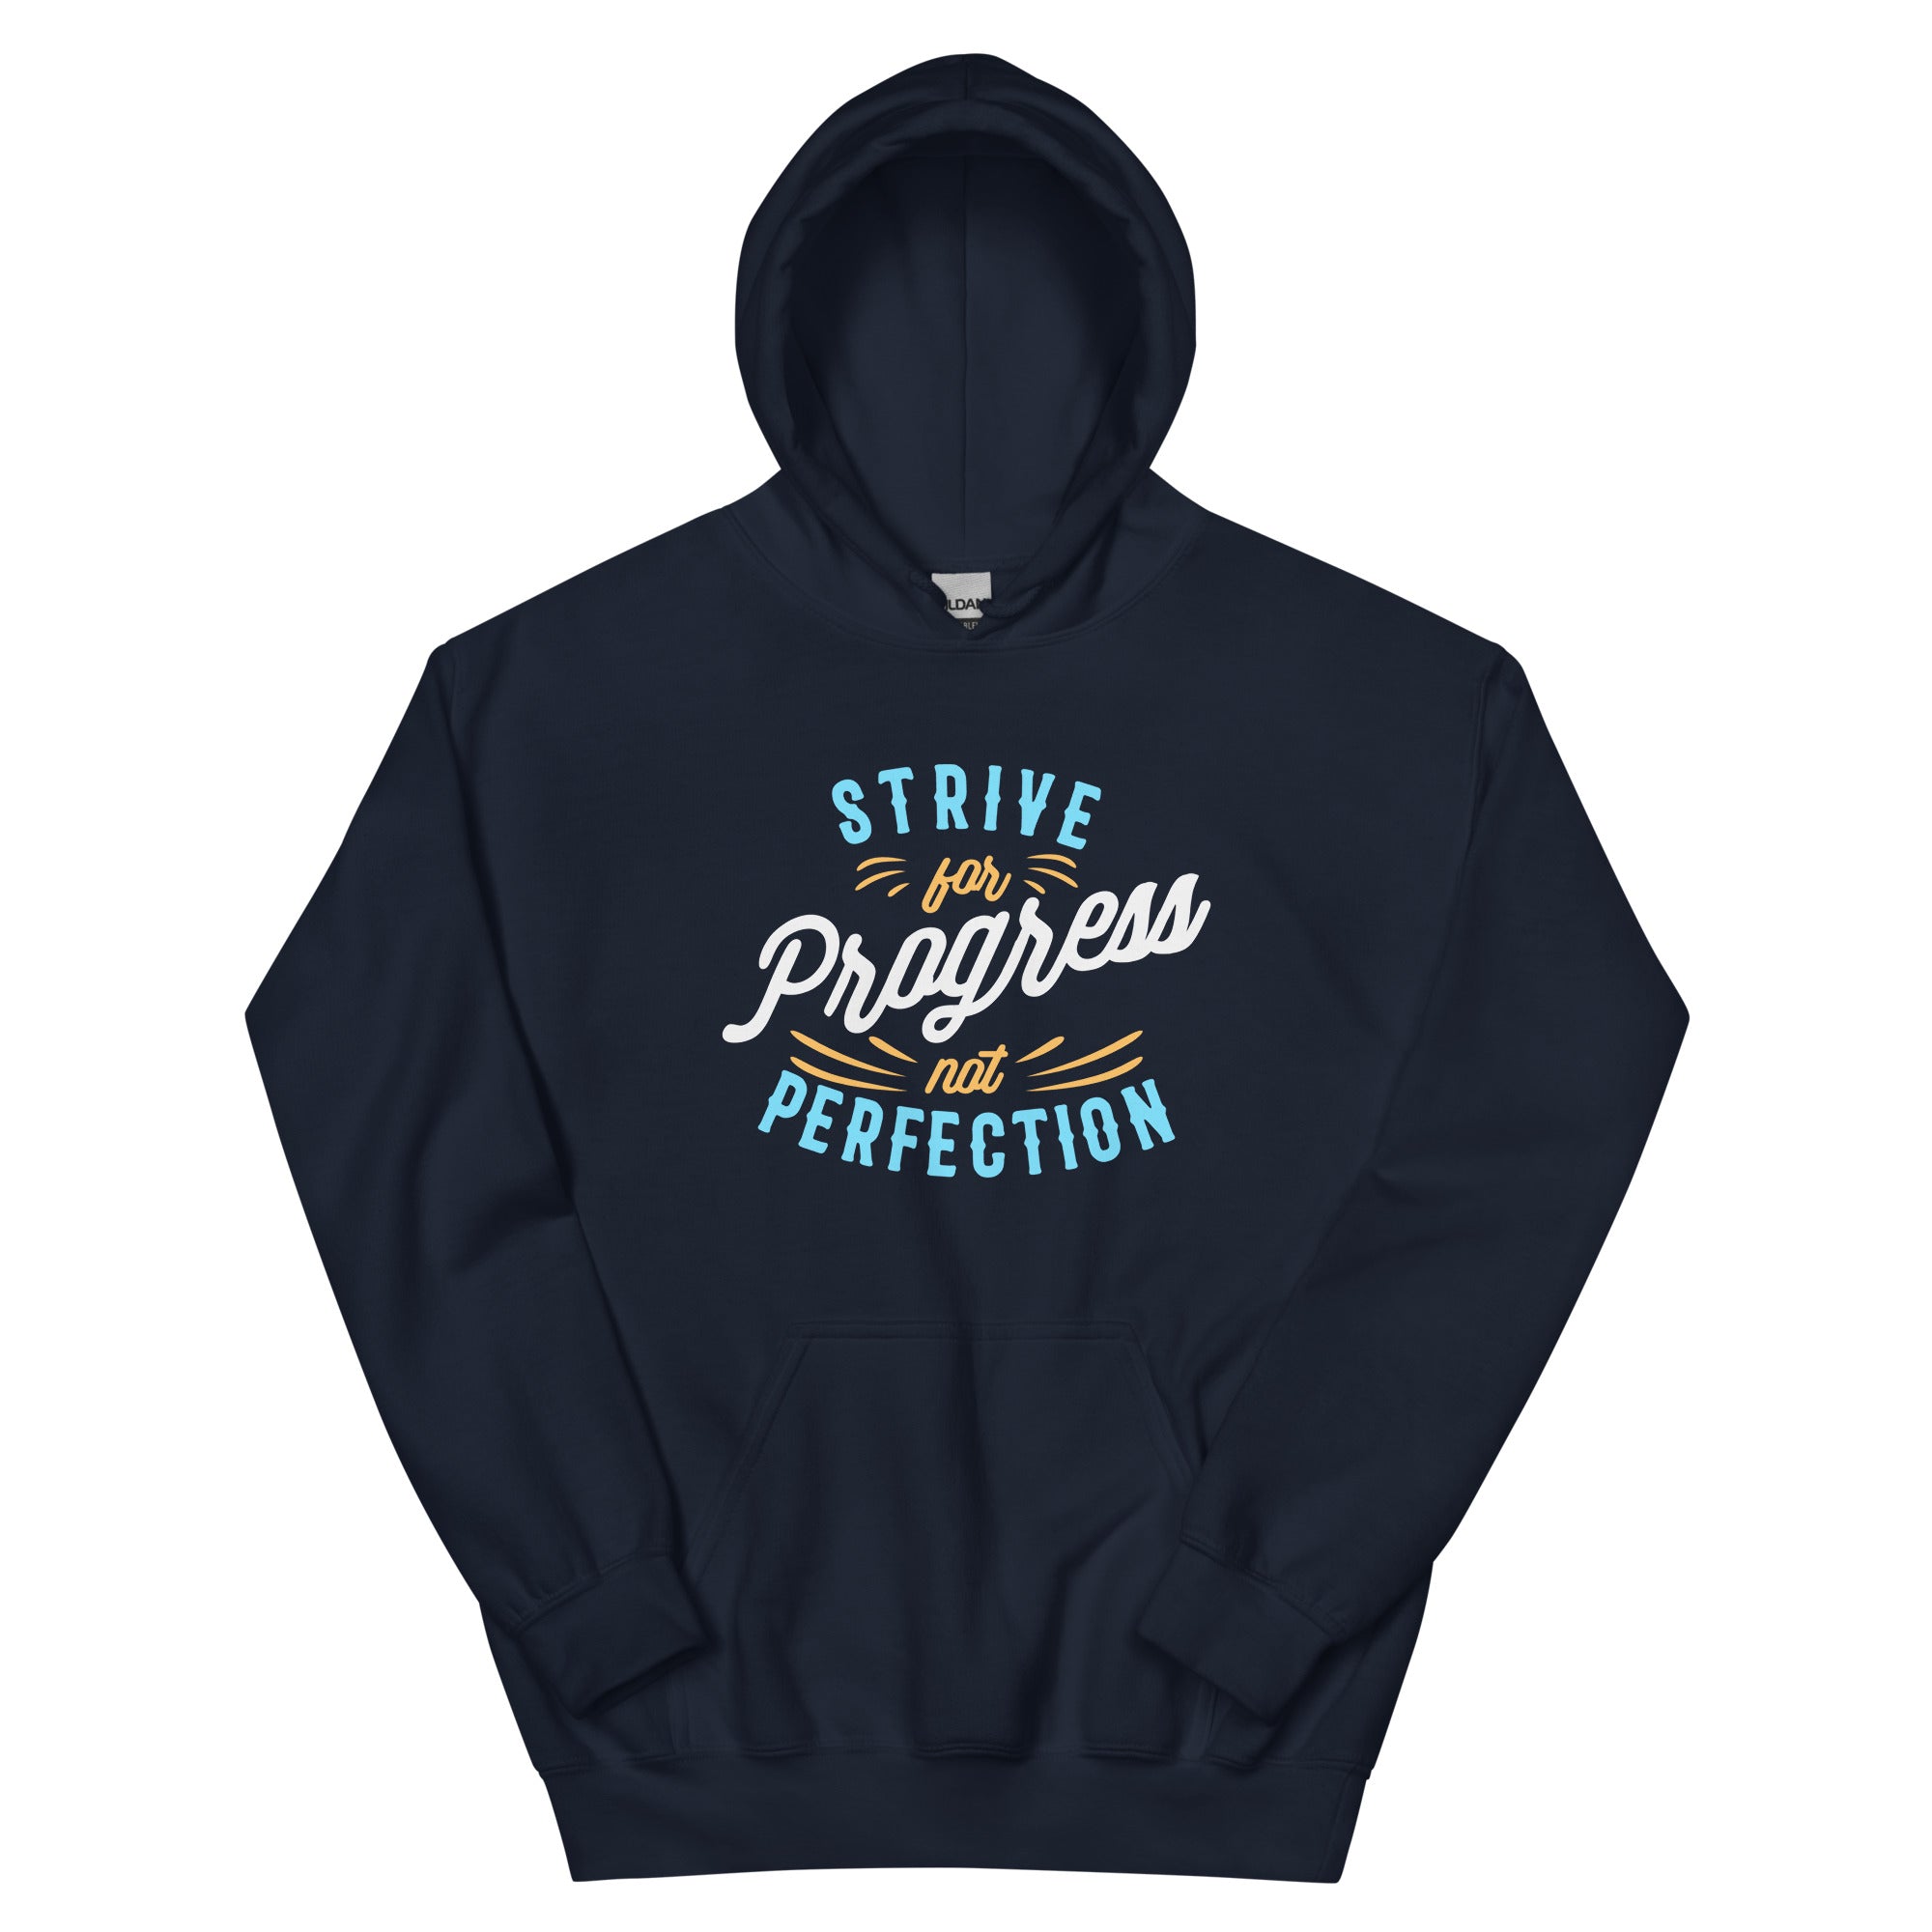 Strive For Progress, Not Perfection - Unisex Hoodie